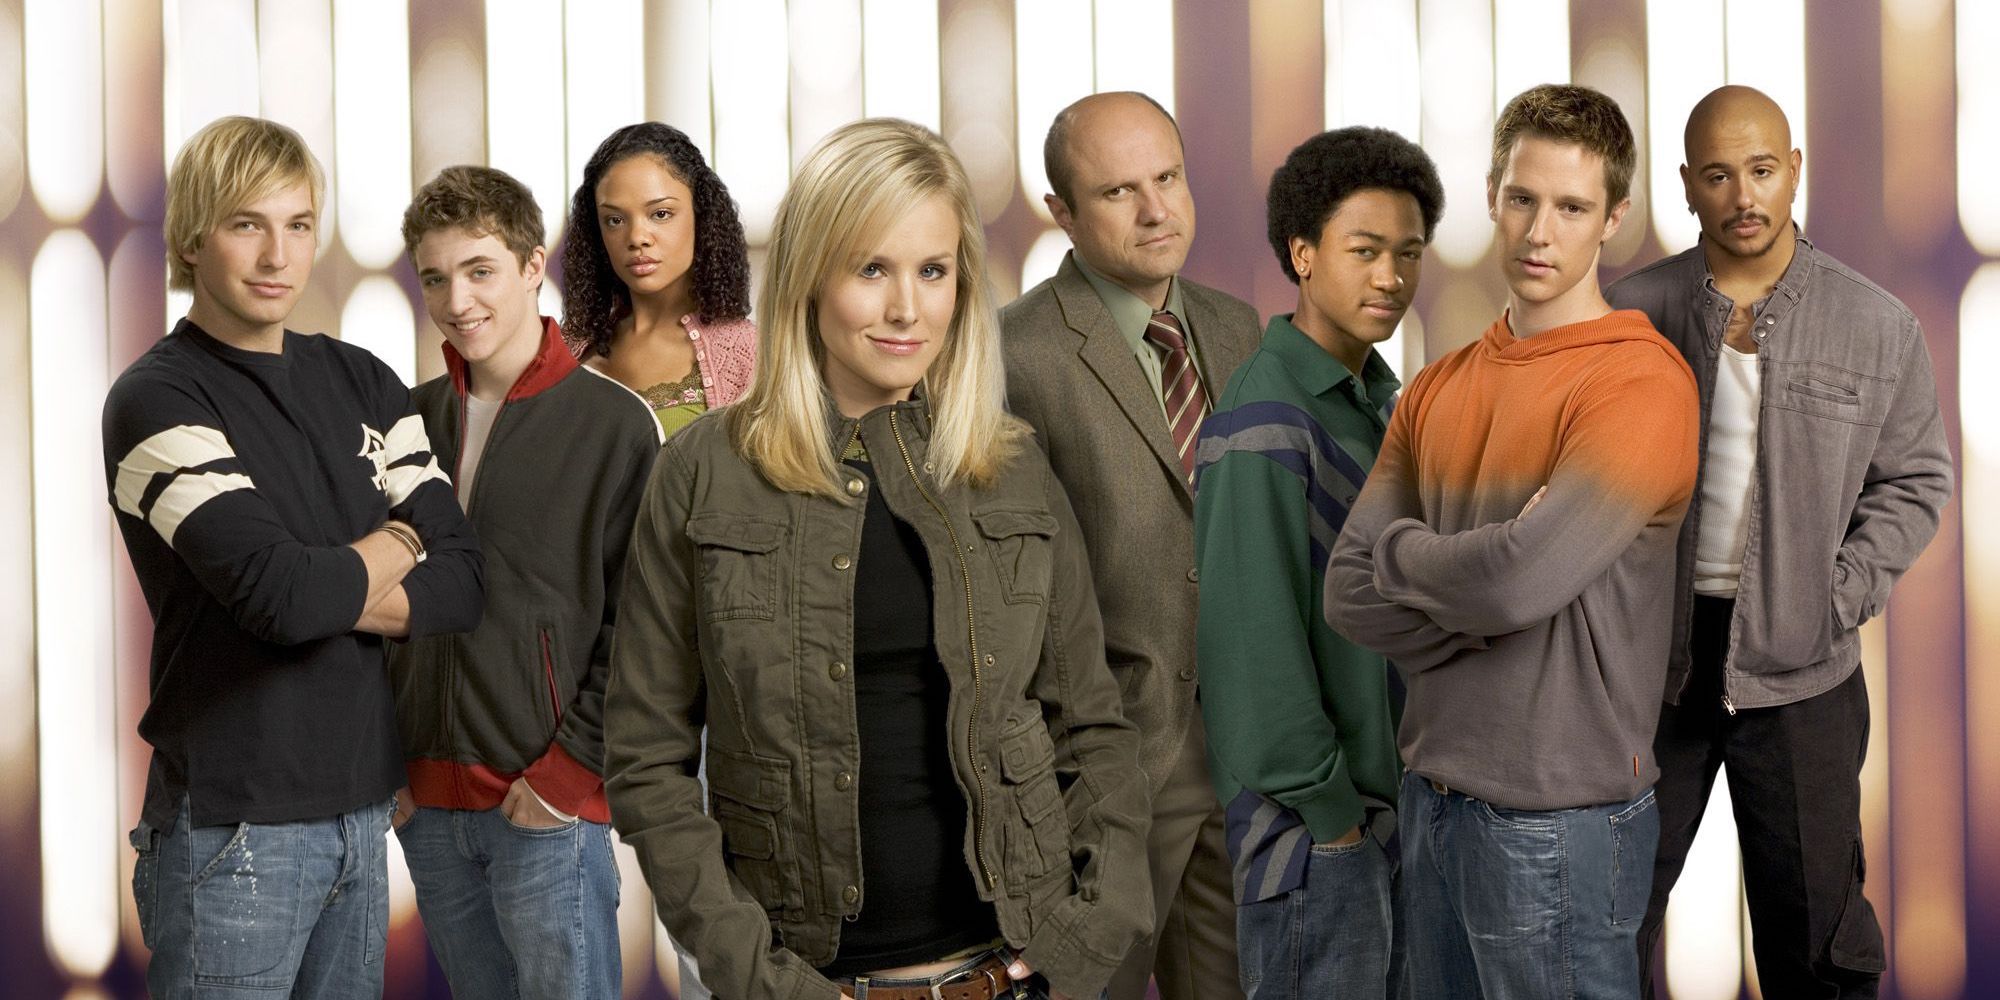 Veronica Mars Every Season Ranked According to Rotten Tomatoes